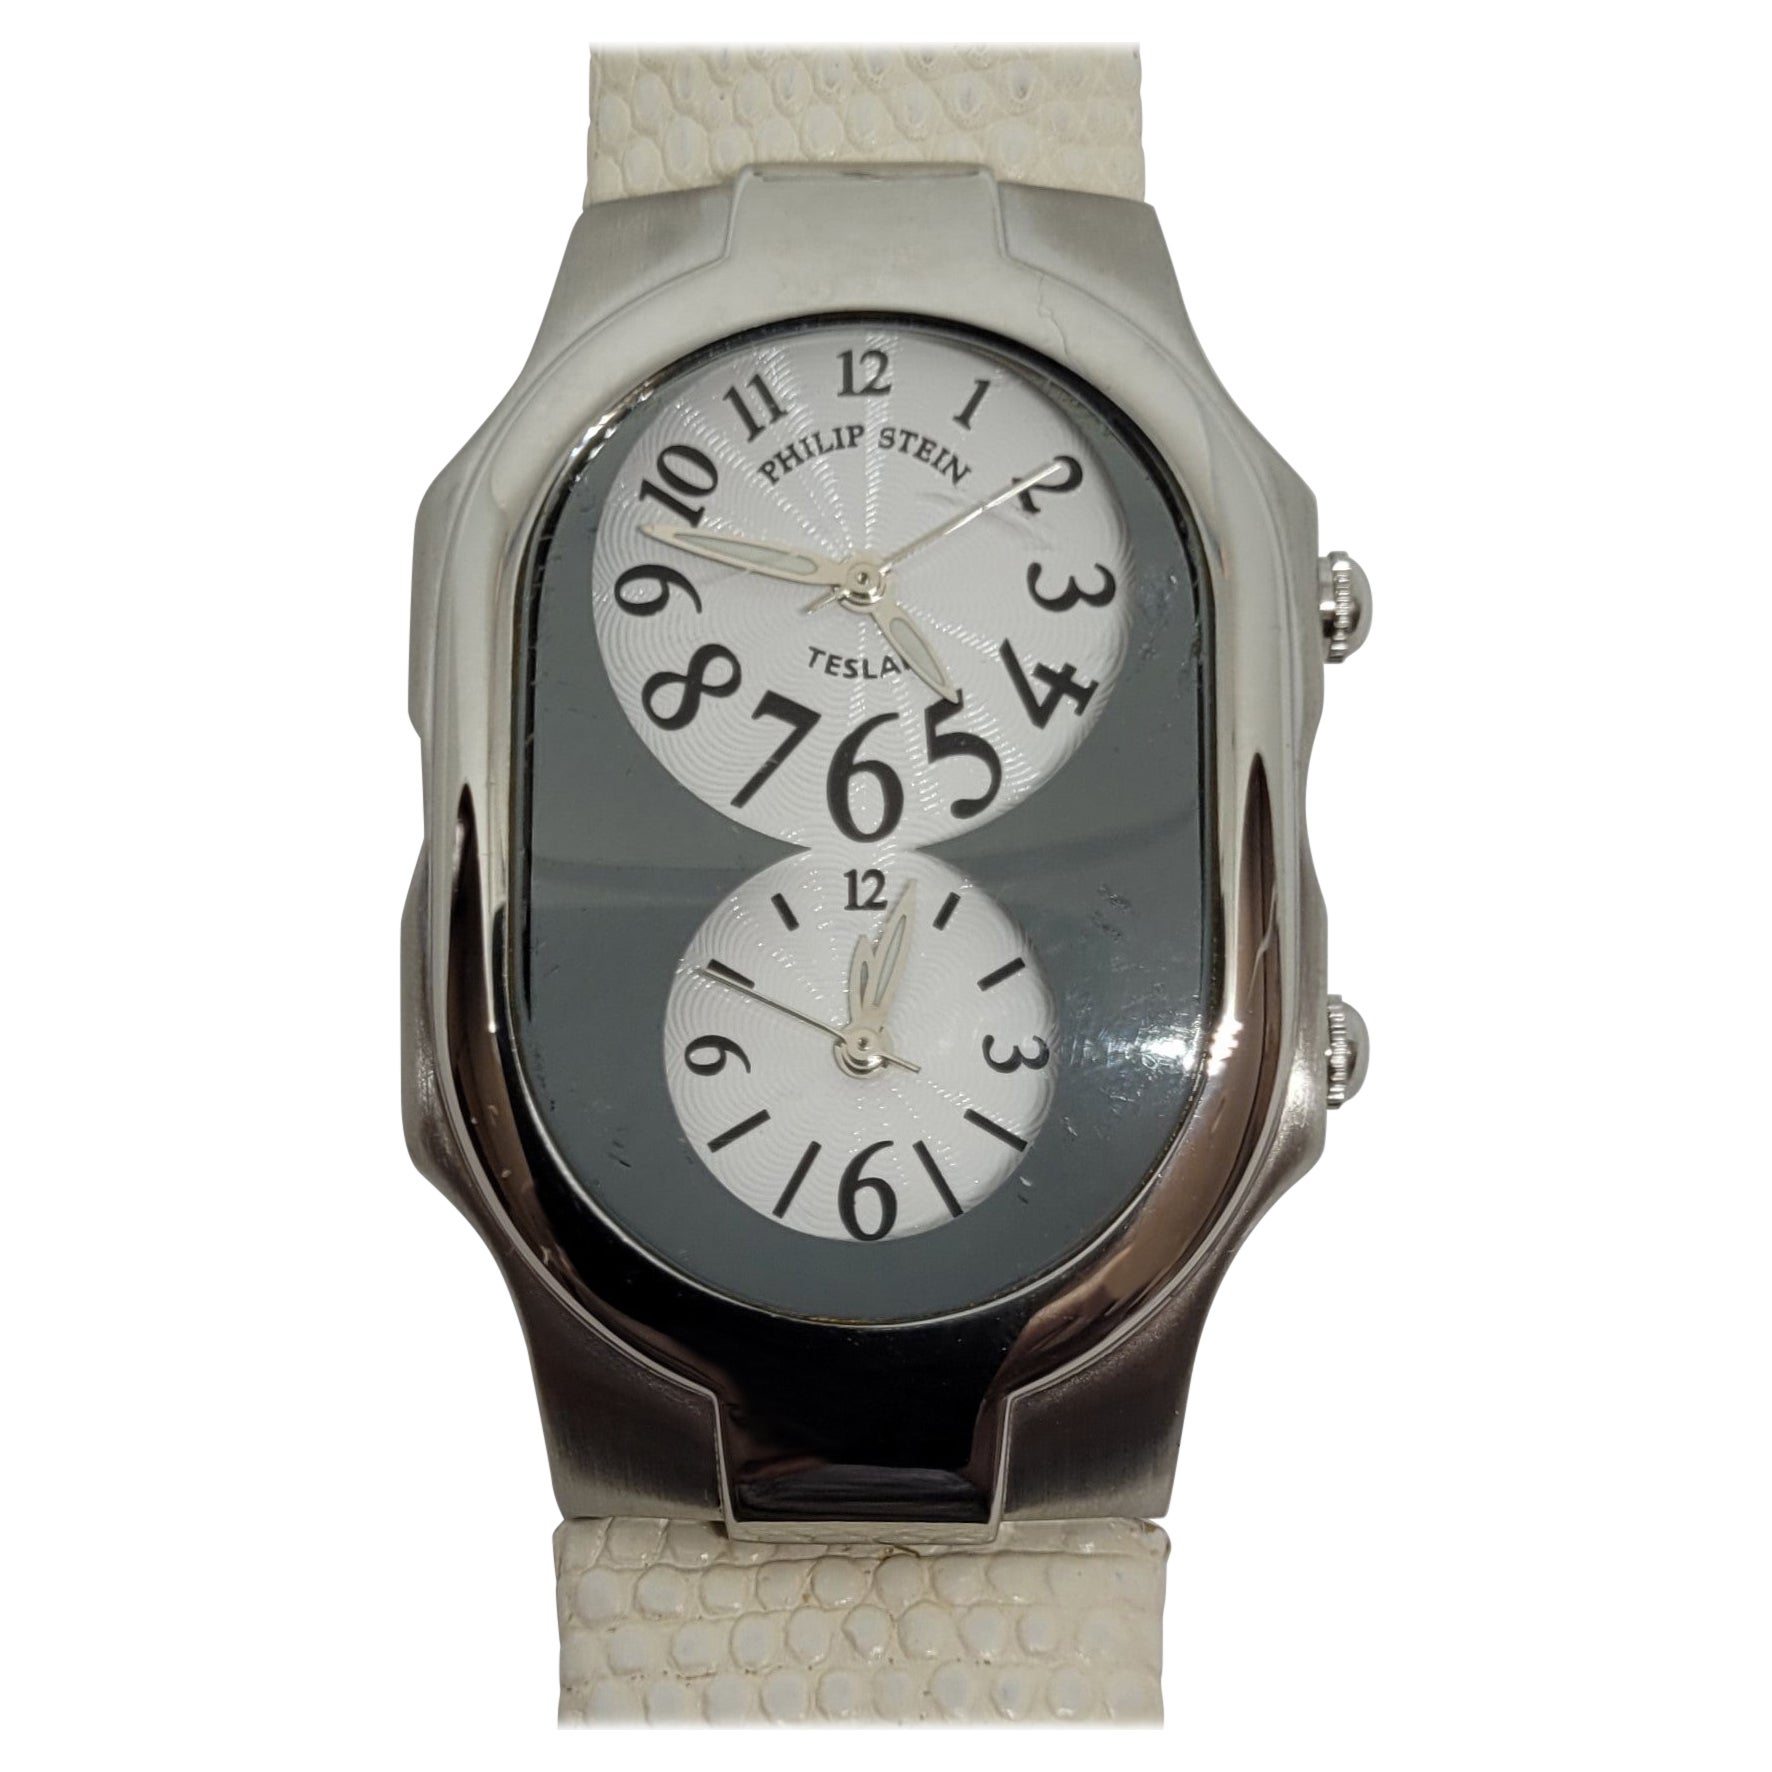 Philip Stein Watch Dual Teslar White Leather Stainless Steel Case 48mm x 30mm